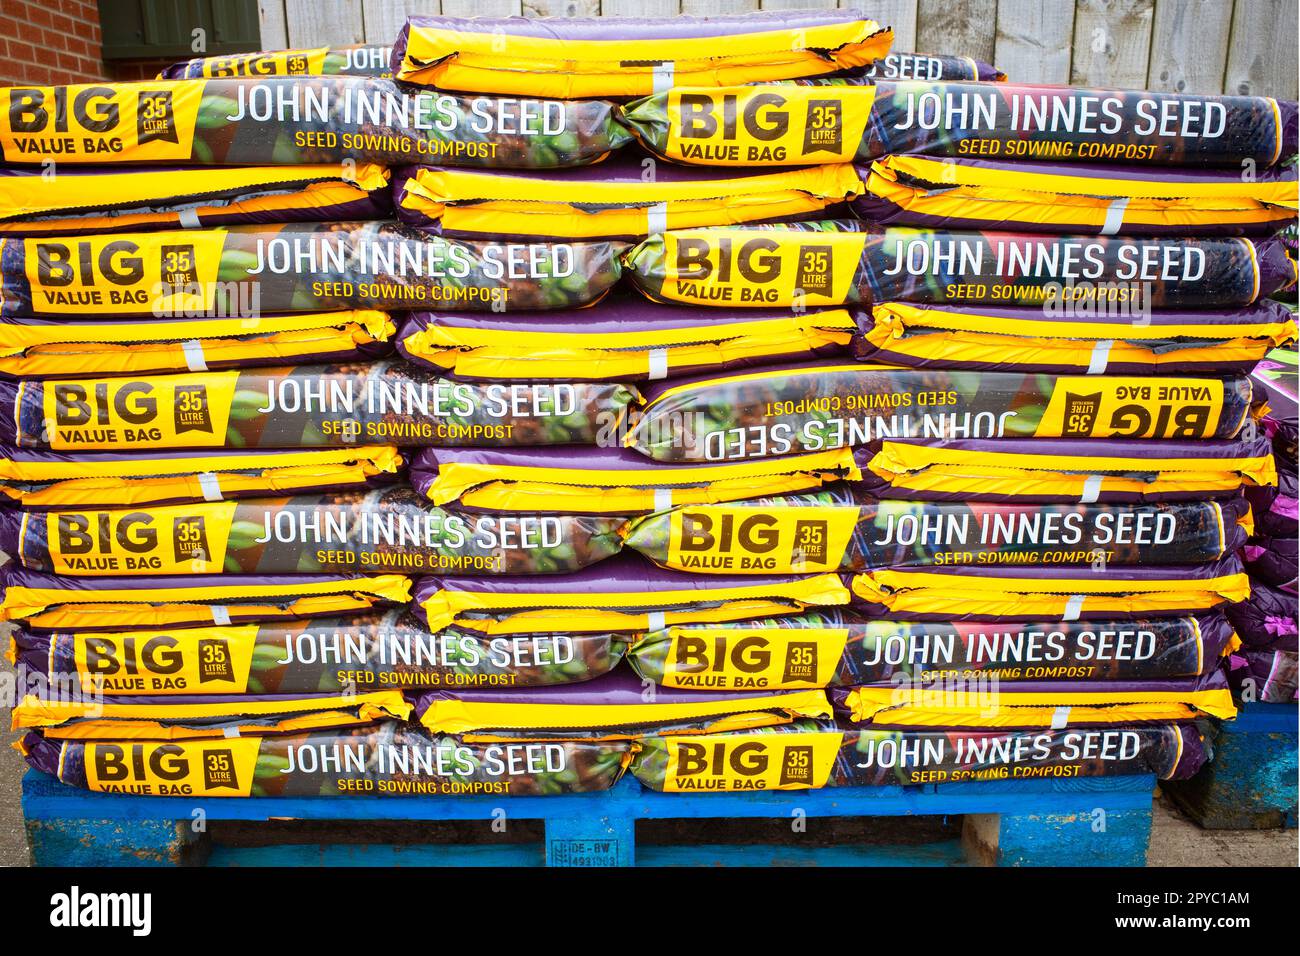 A stack of  35 litre big value bags of John Innes seed sowing compost for sale in a farm shop Stock Photo